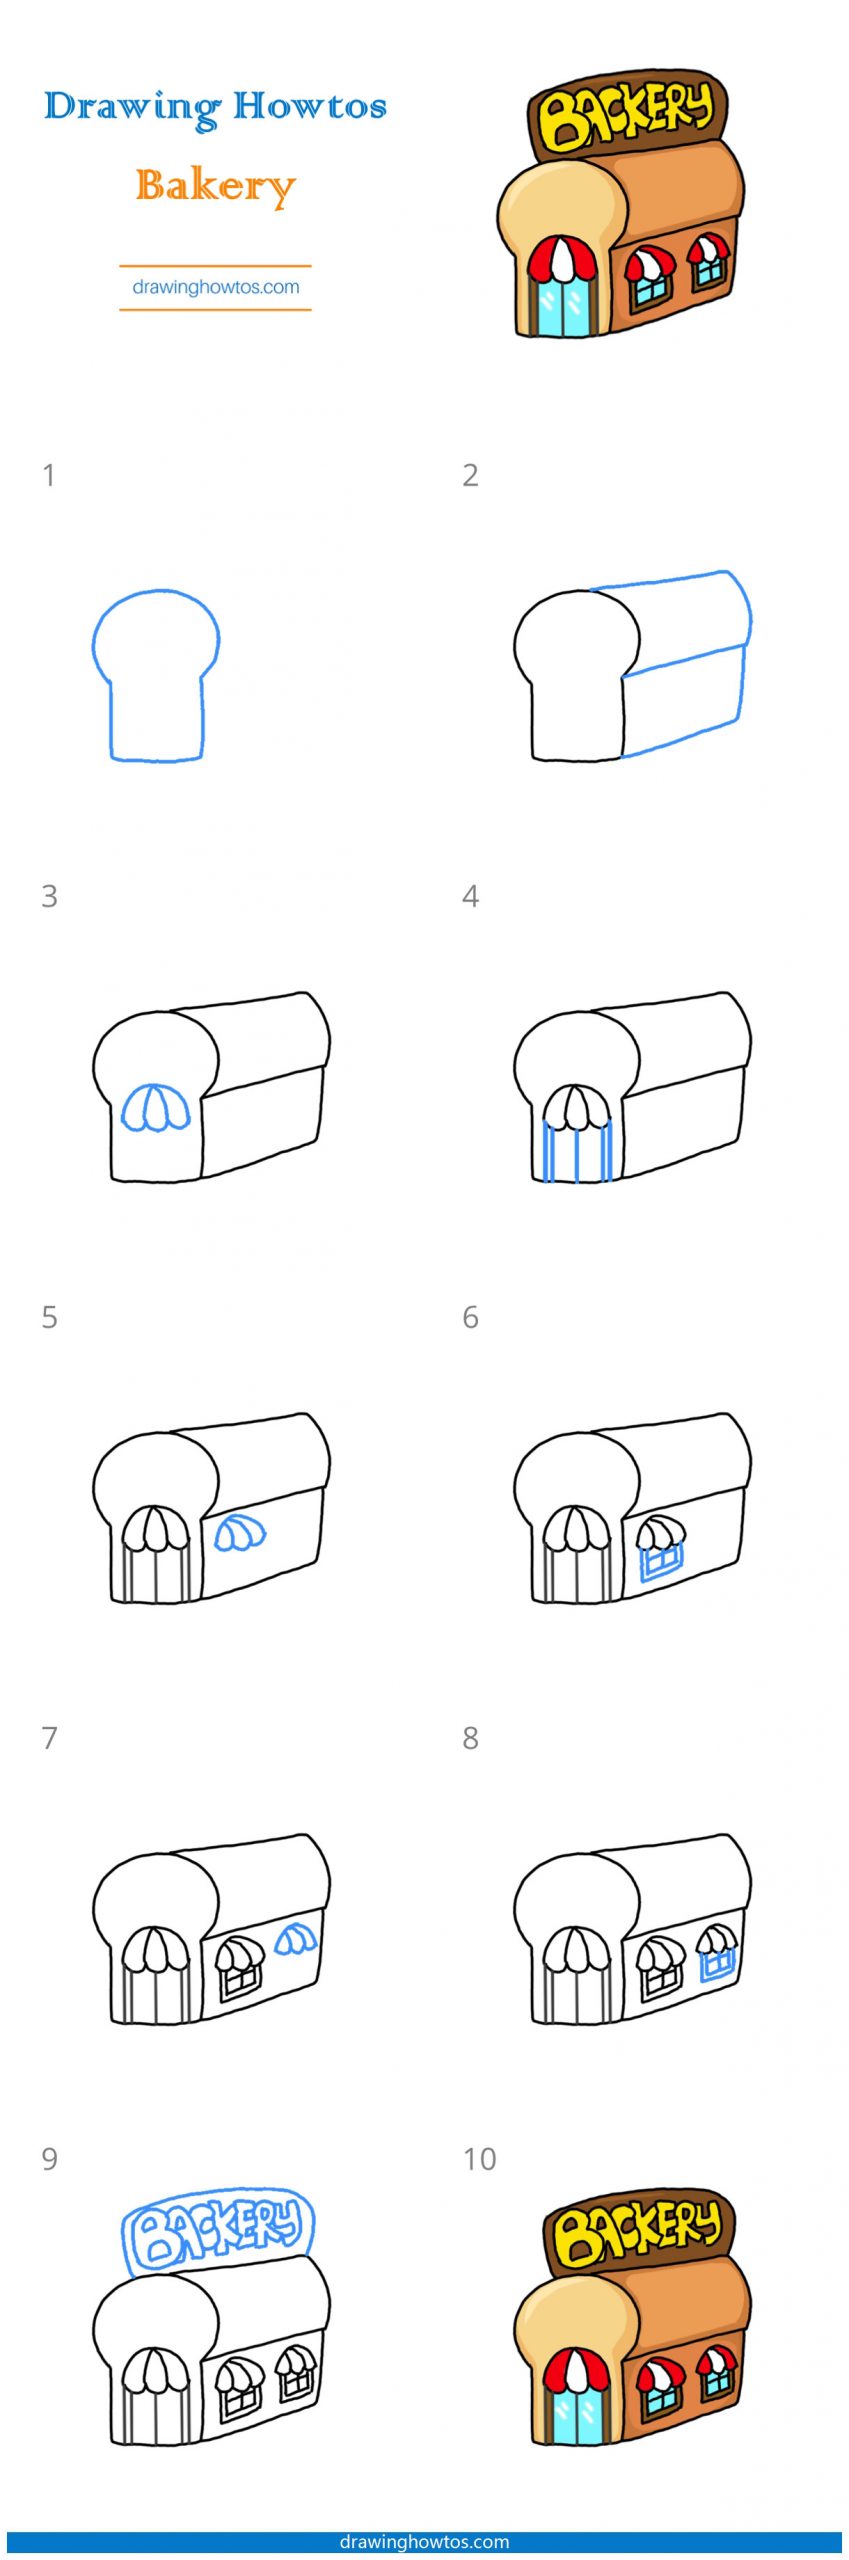 How to Draw a Bakery Step by Step Easy Drawing Guides Drawing Howtos